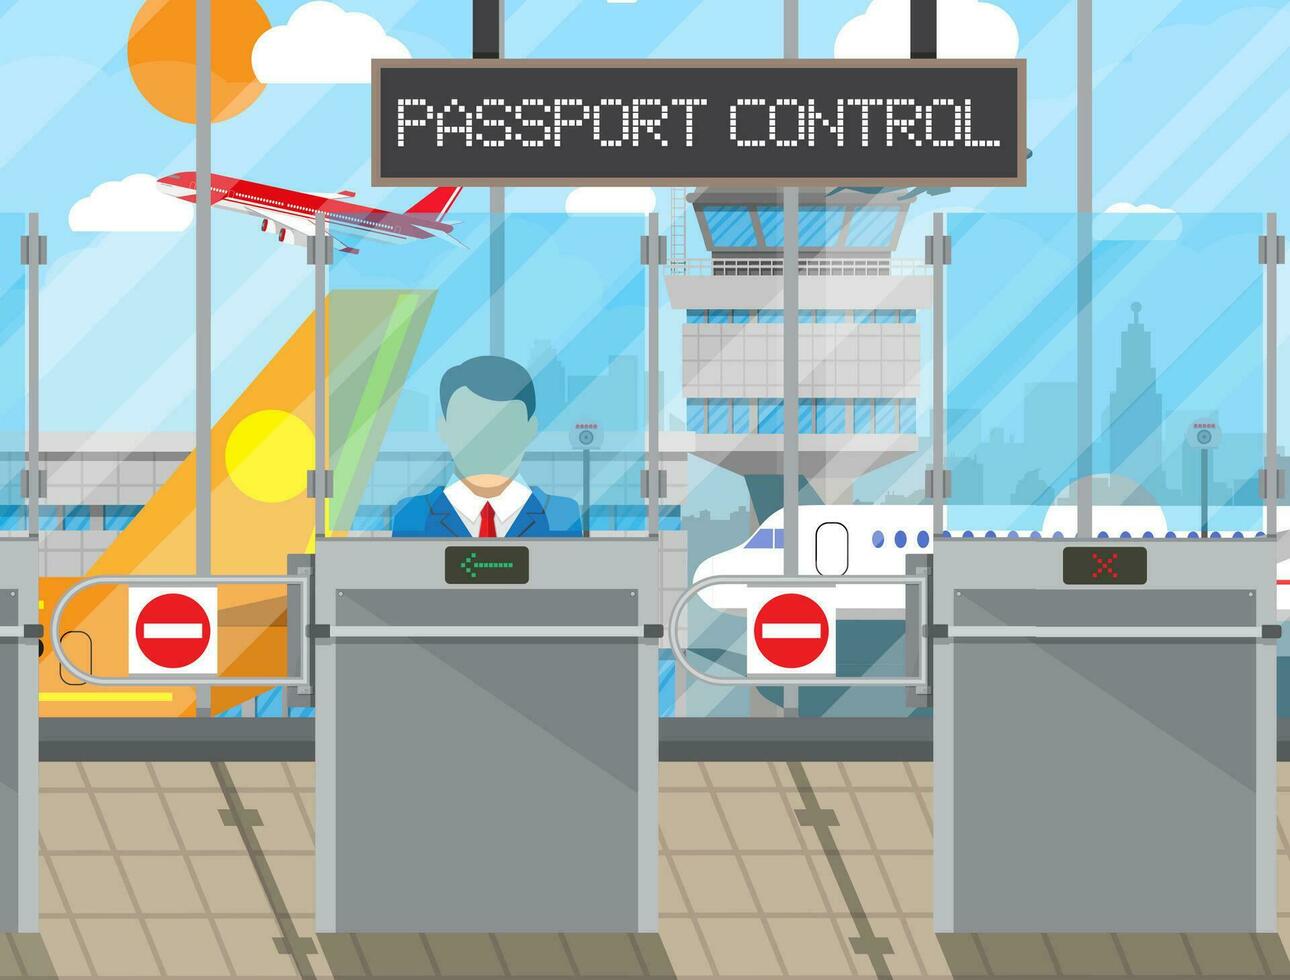 Border control counter concept, immigration officer, camera, passport control sign. Airport terminal, control tower, aircraft, cityscape. Vector illustration in flat style